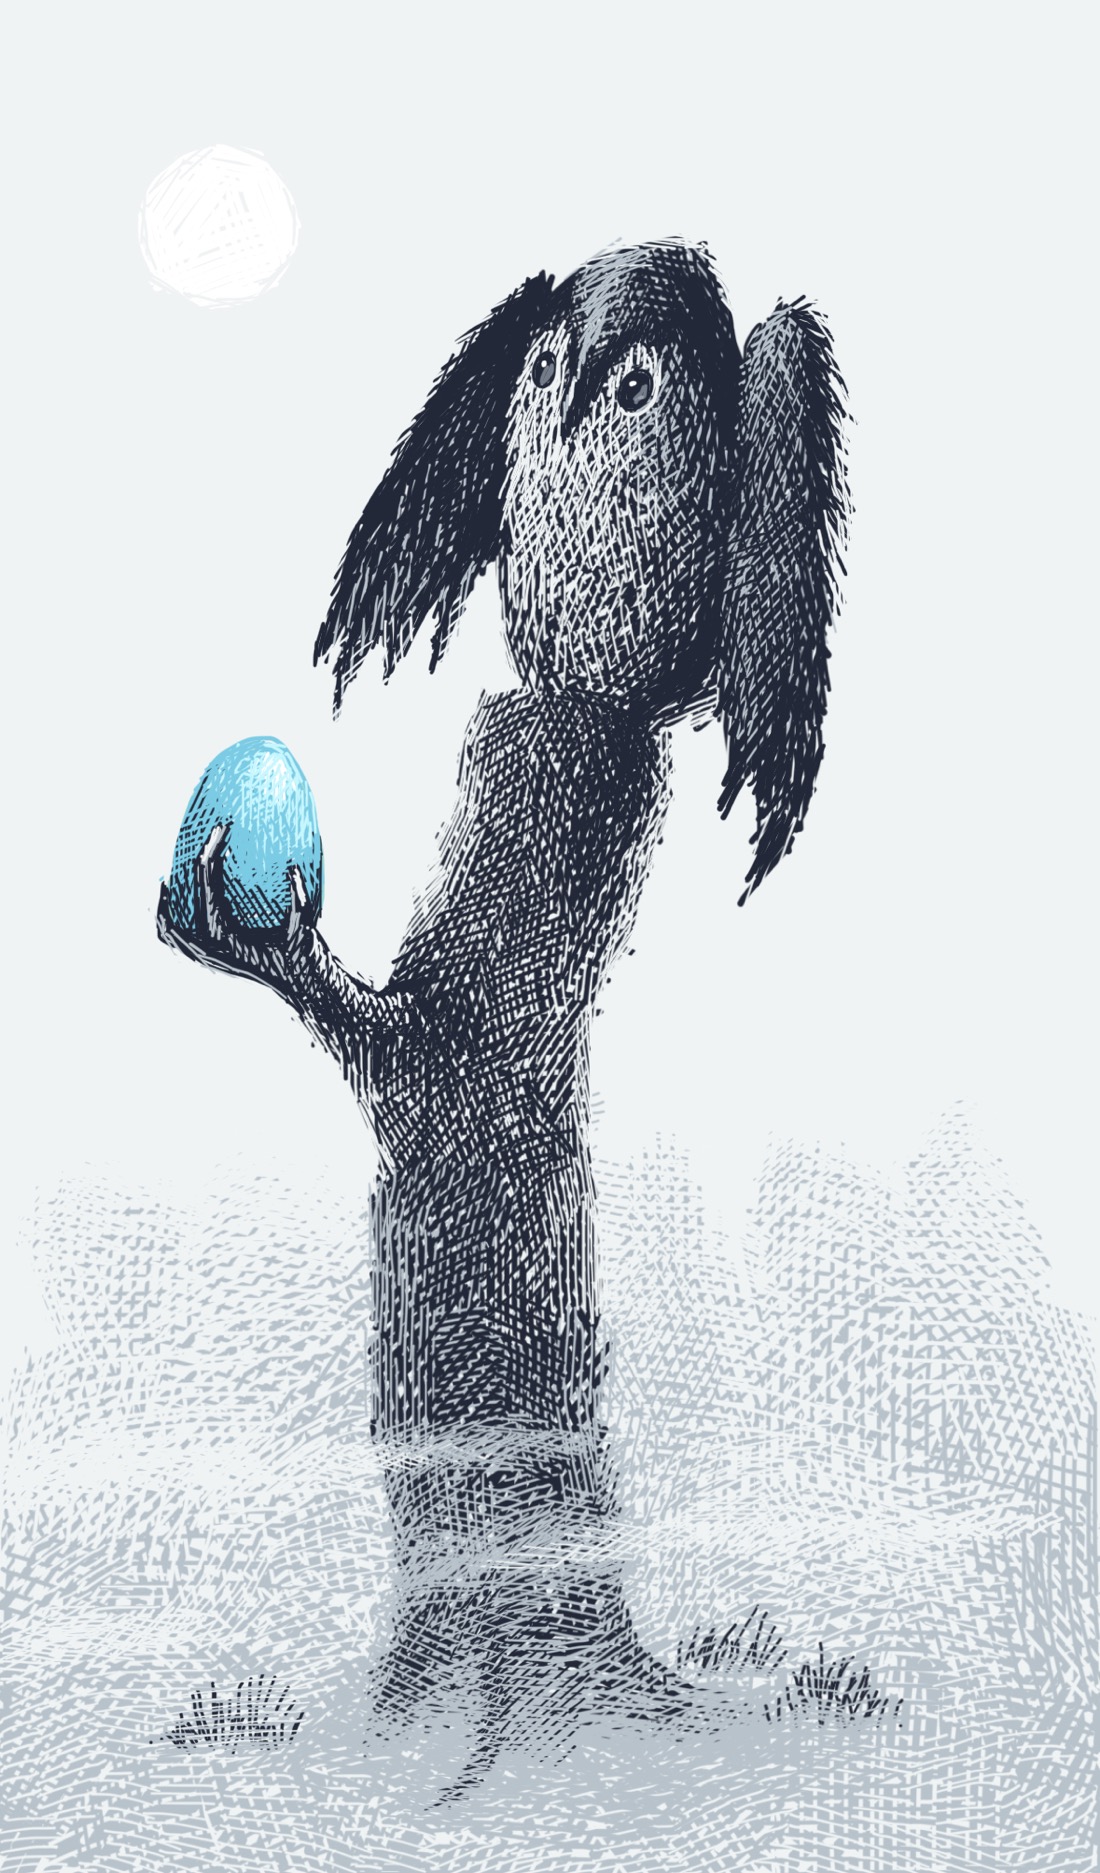 The stump of a tree rises from fog. This is a relatively tall stump, maybe a quarter or third the height of the original tree. On top of the stump sits a large, roundish bird with an owl-like face, hunched into its wings. Sticking out from one side of the stump is a small clawlike hand, holding a large blue egg. Above is a hazy sun.